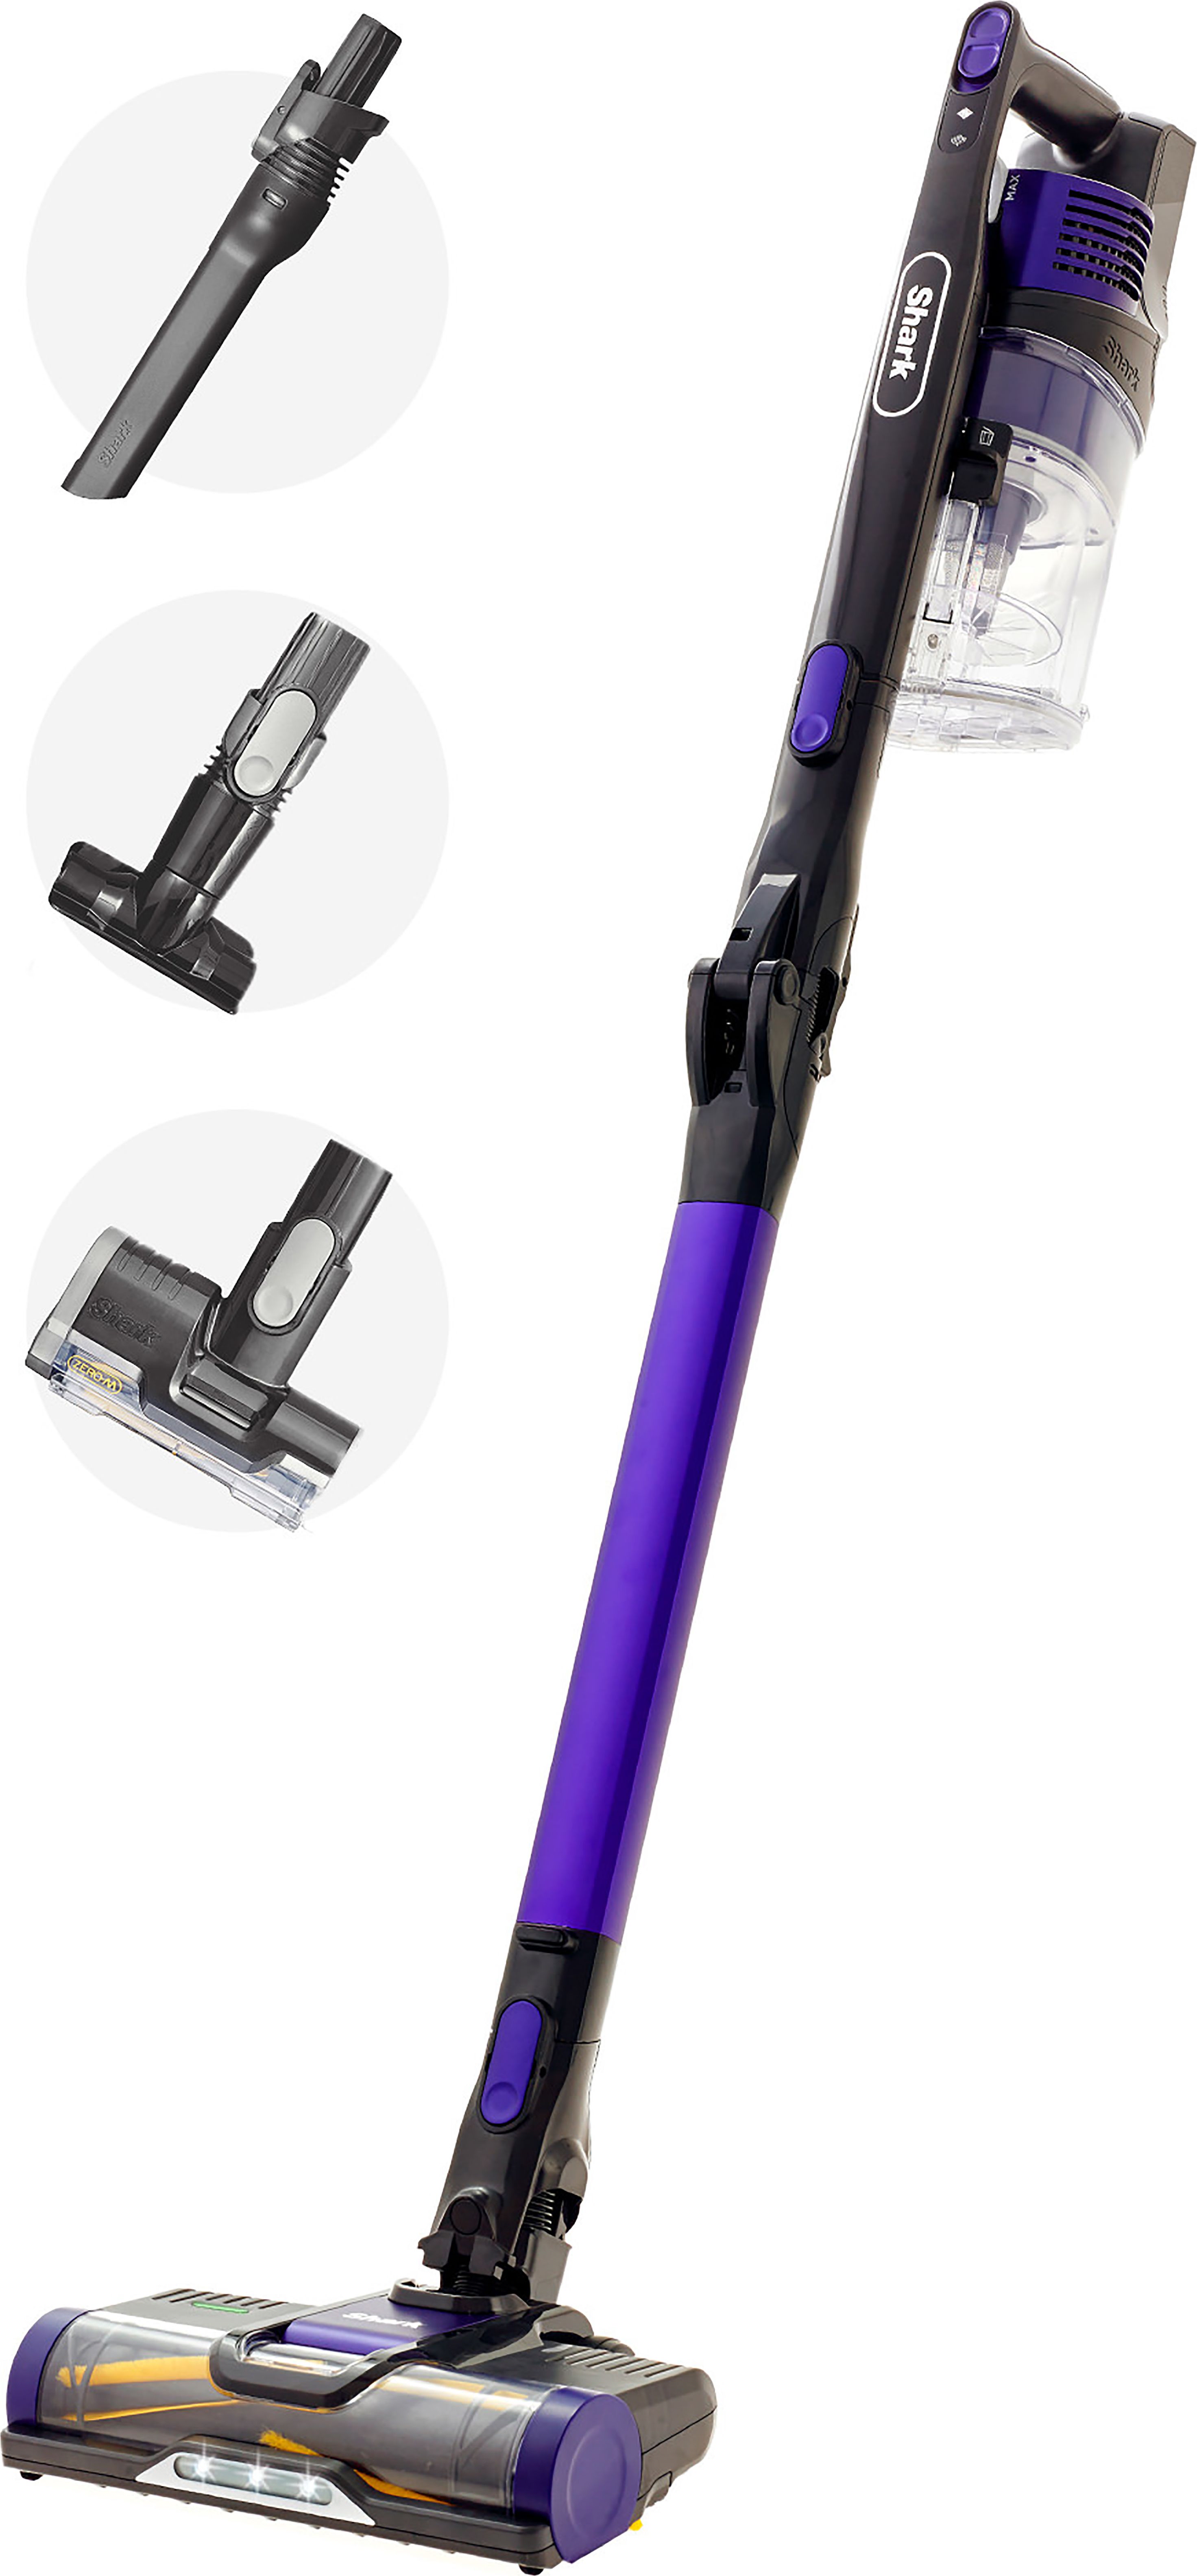 Shark Anti-Hair Wrap IZ202UKT Cordless Vacuum Cleaner with up to 40 Minutes Run Time - Purple, Purple